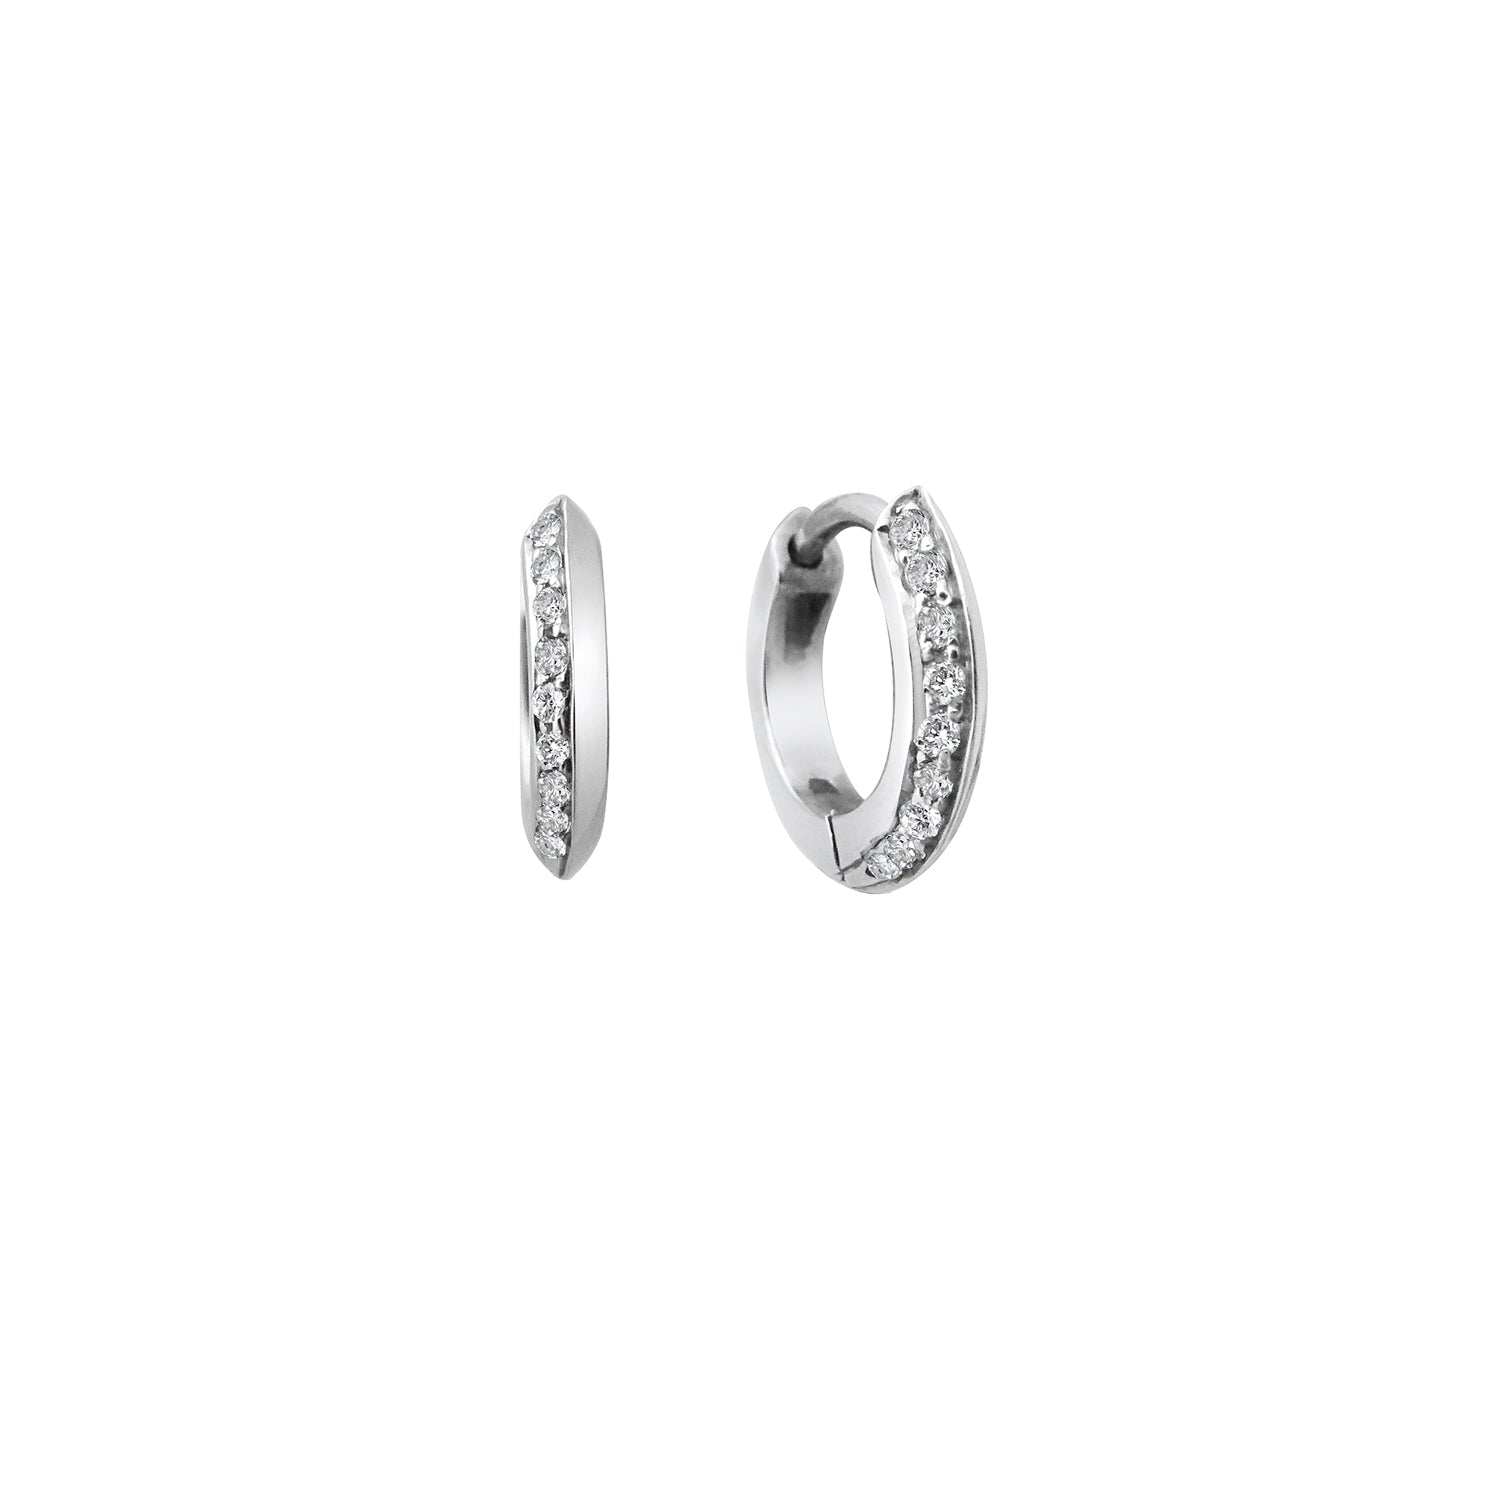 The 10mm Knife Edge Diamond Huggie Hoop Earrings by East London jeweller Rachel Boston | Discover our collections of unique and timeless engagement rings, wedding rings, and modern fine jewellery.